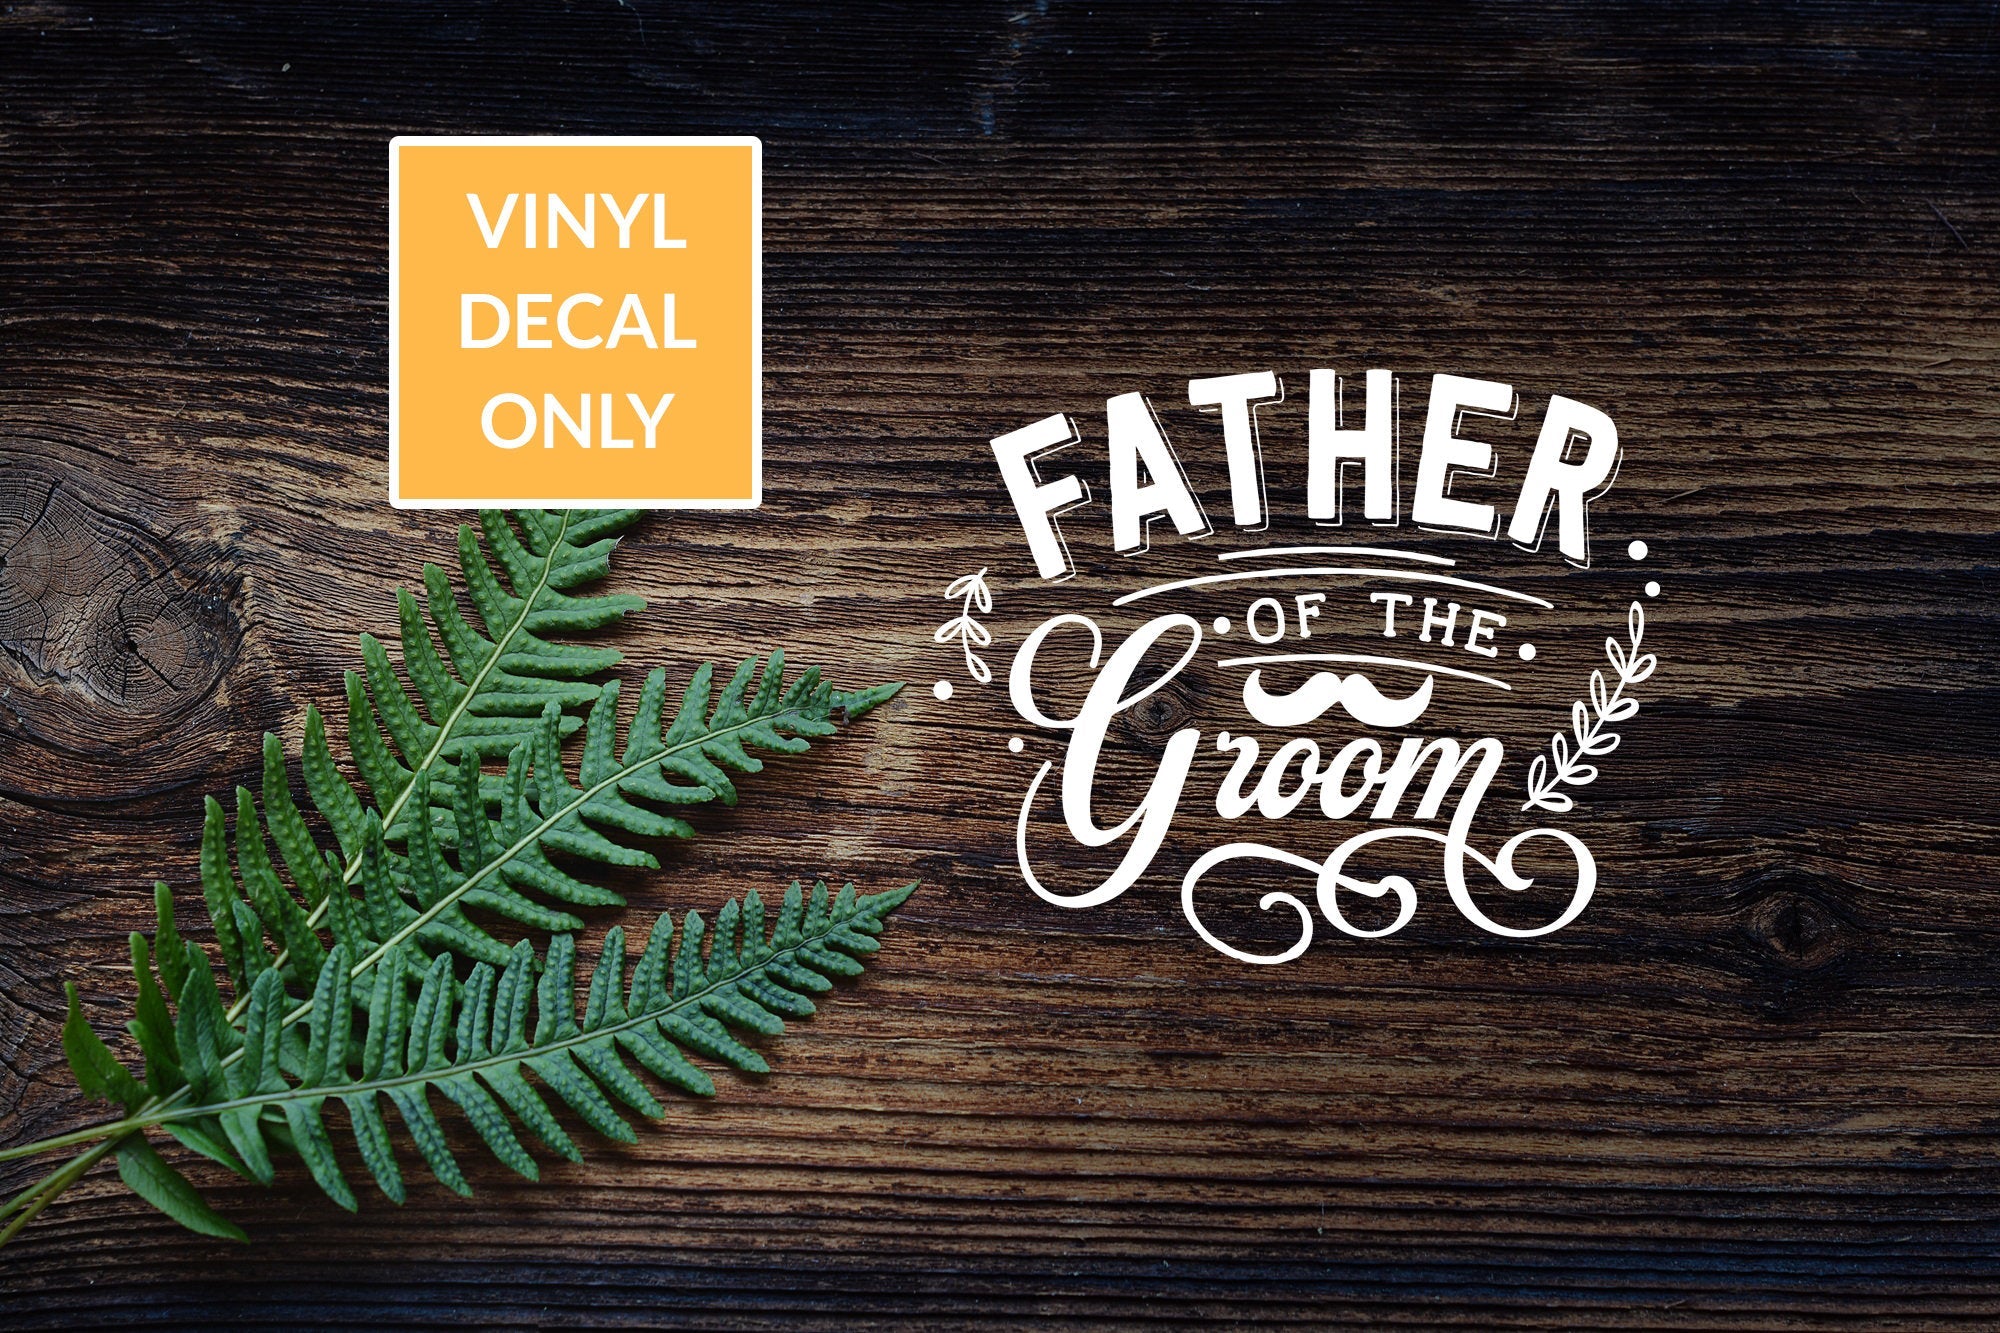 Father of the Groom decal - Permanent Vinyl Decal for Glass, Metal, Wood Signs, and other Smooth Surfaces